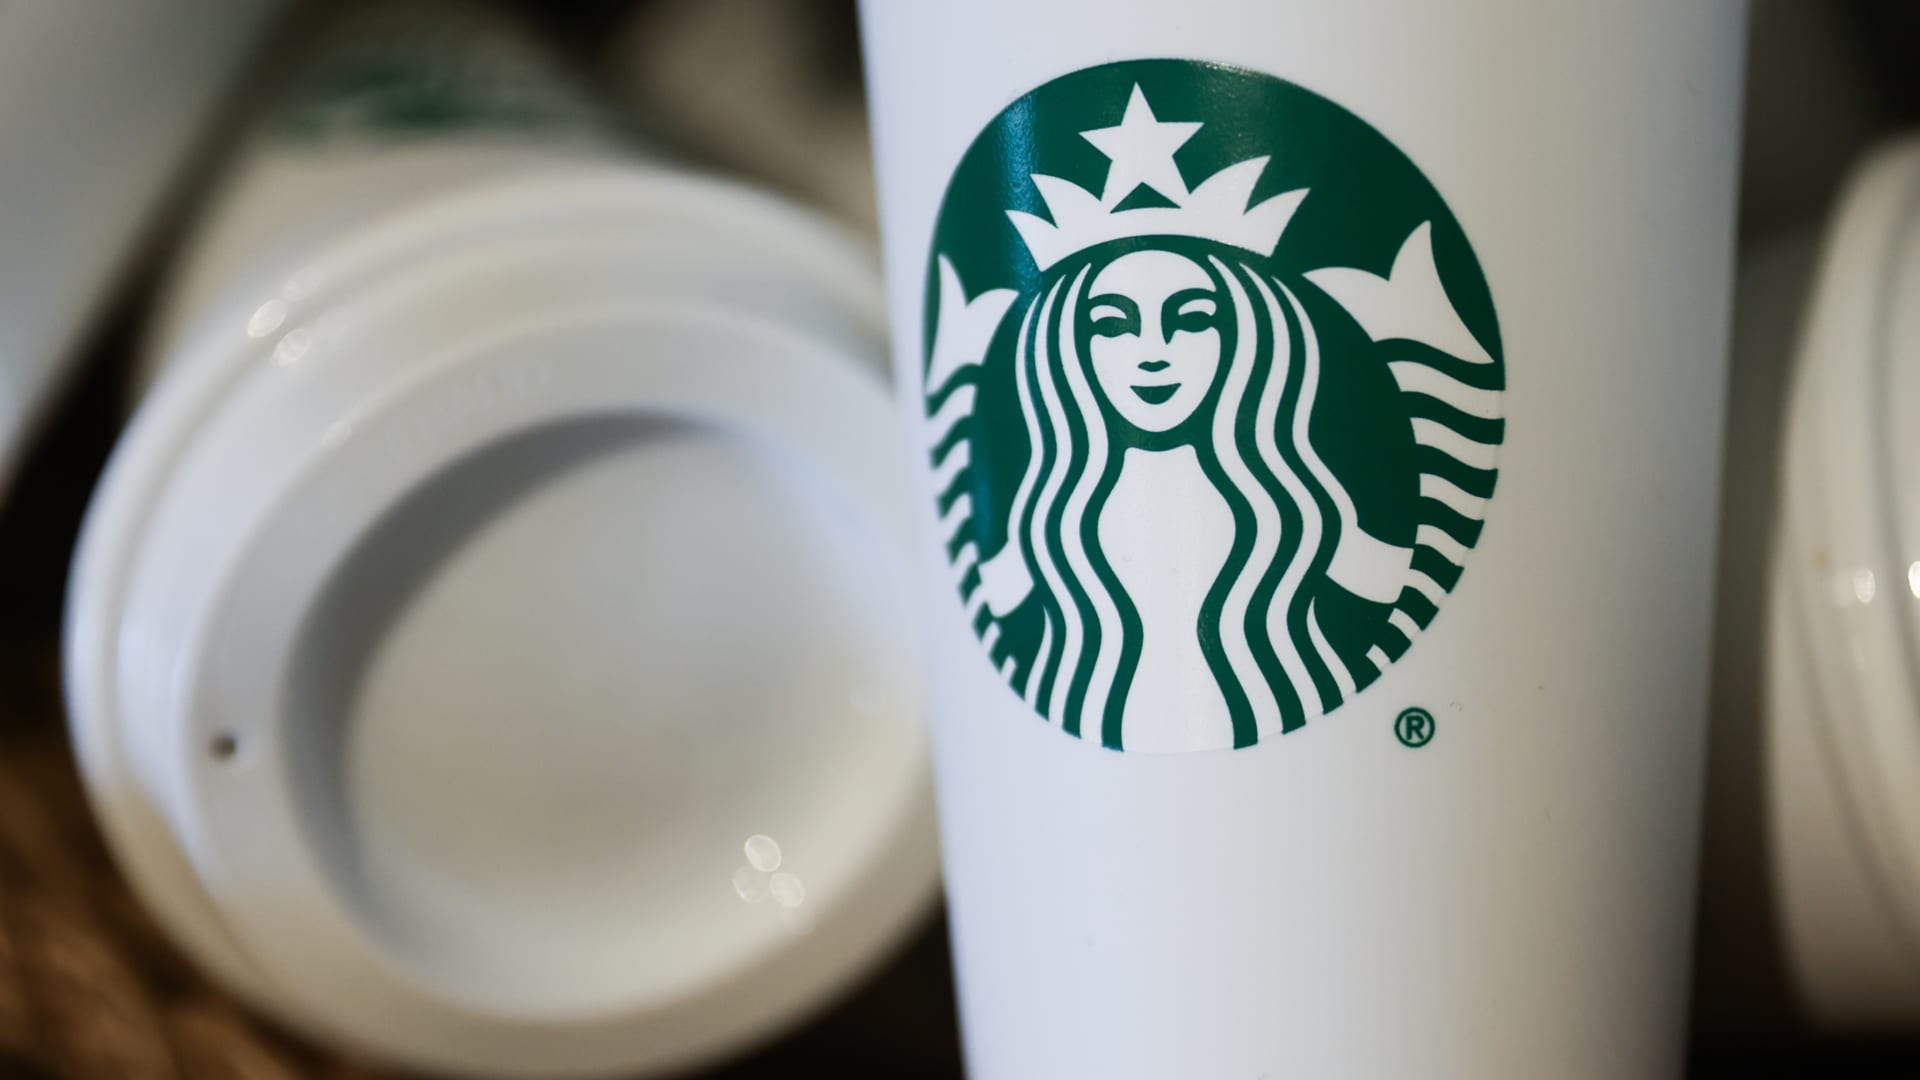 The stock market gets nailed by the Fed, again. Plus, Starbucks’ quiet comeback